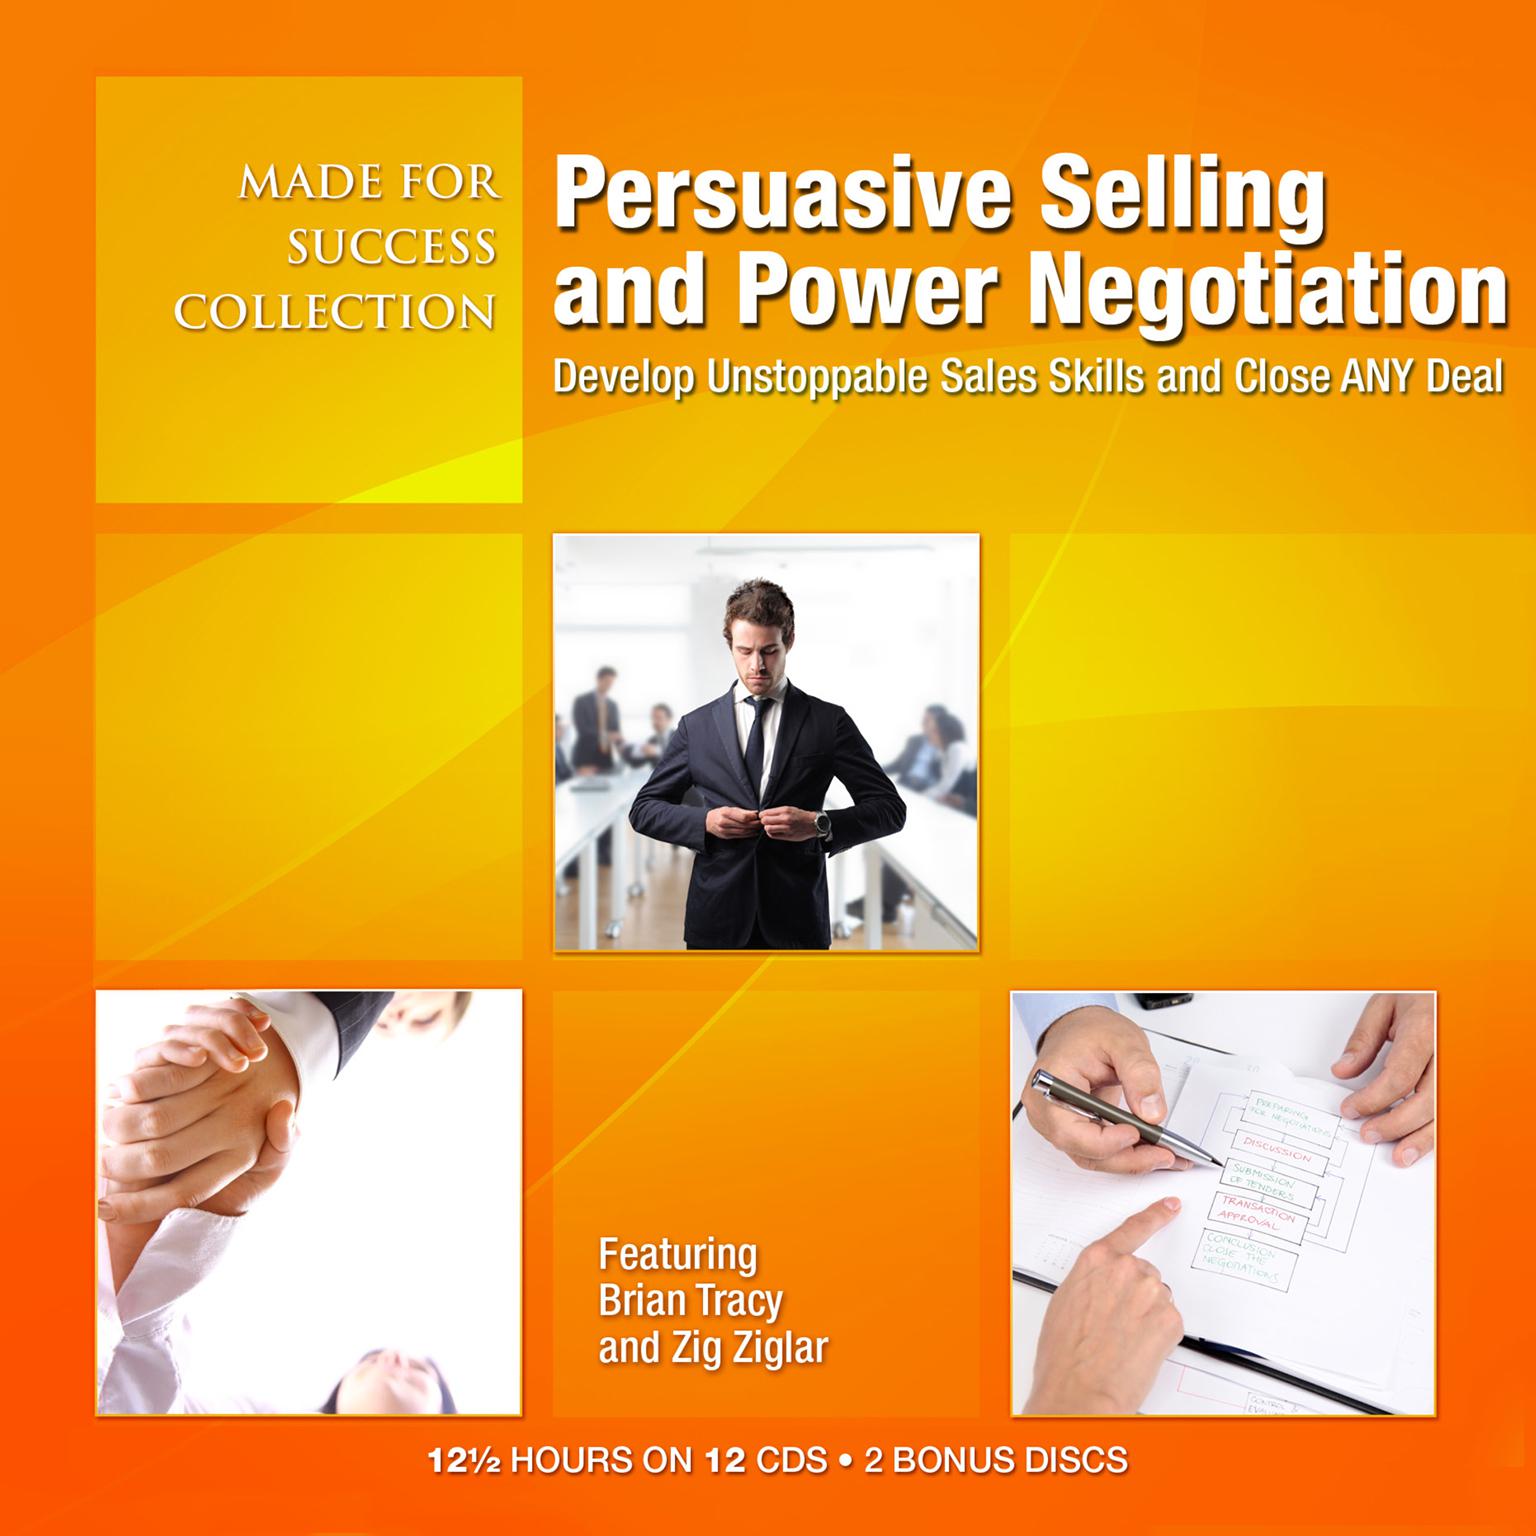 Persuasive Selling and Power Negotiation: Develop Unstoppable Sales Skills and Close ANY Deal Audiobook, by Made for Success